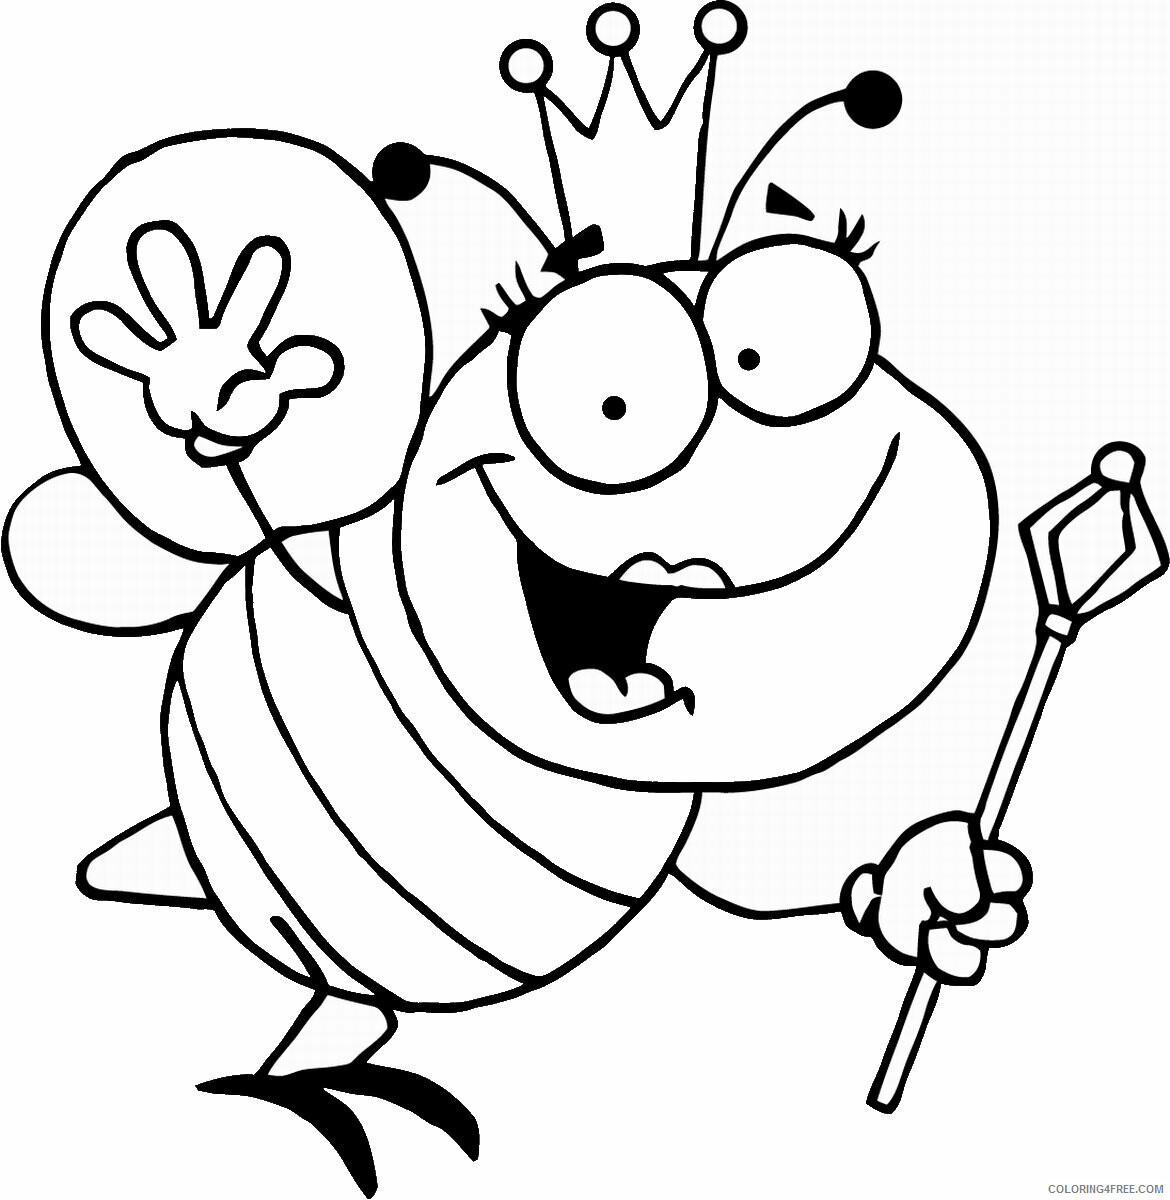 Bee Coloring Pages Animal Printable Sheets bee_cl_05 2021 0364 Coloring4free